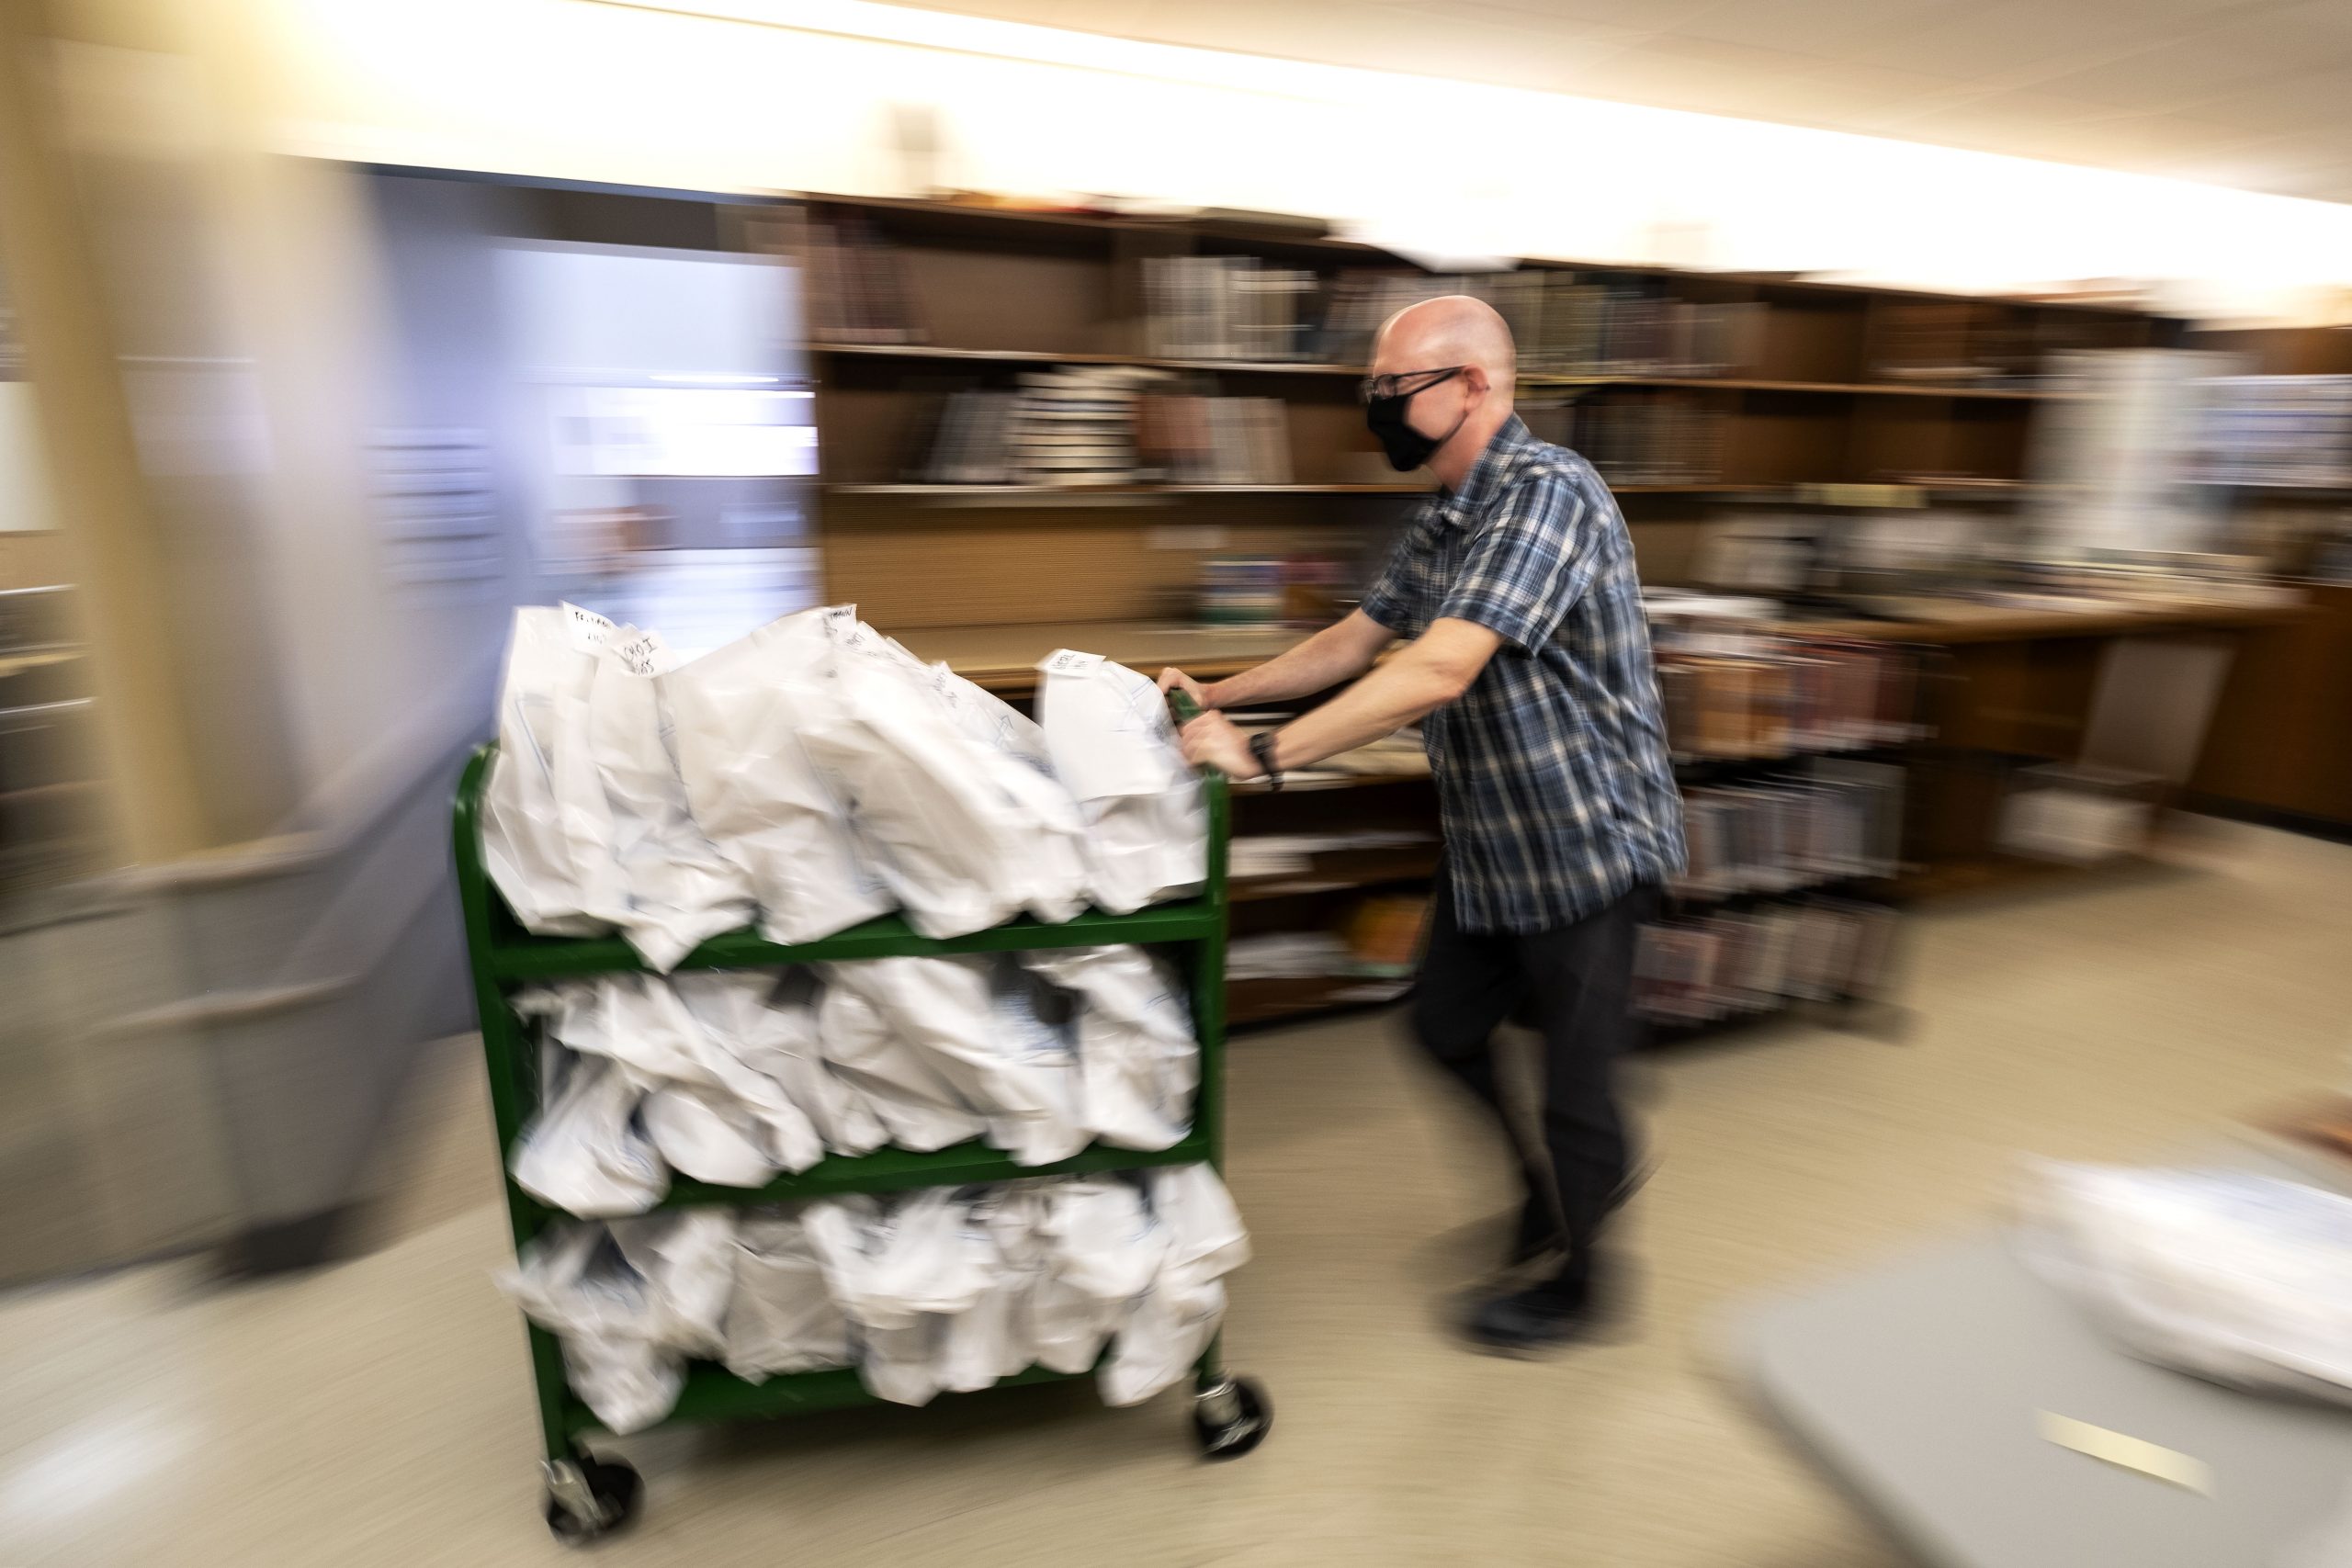 Joe Mitchem, Assistant Head of Davis Library Circulation, readies books for curbside pick-up.